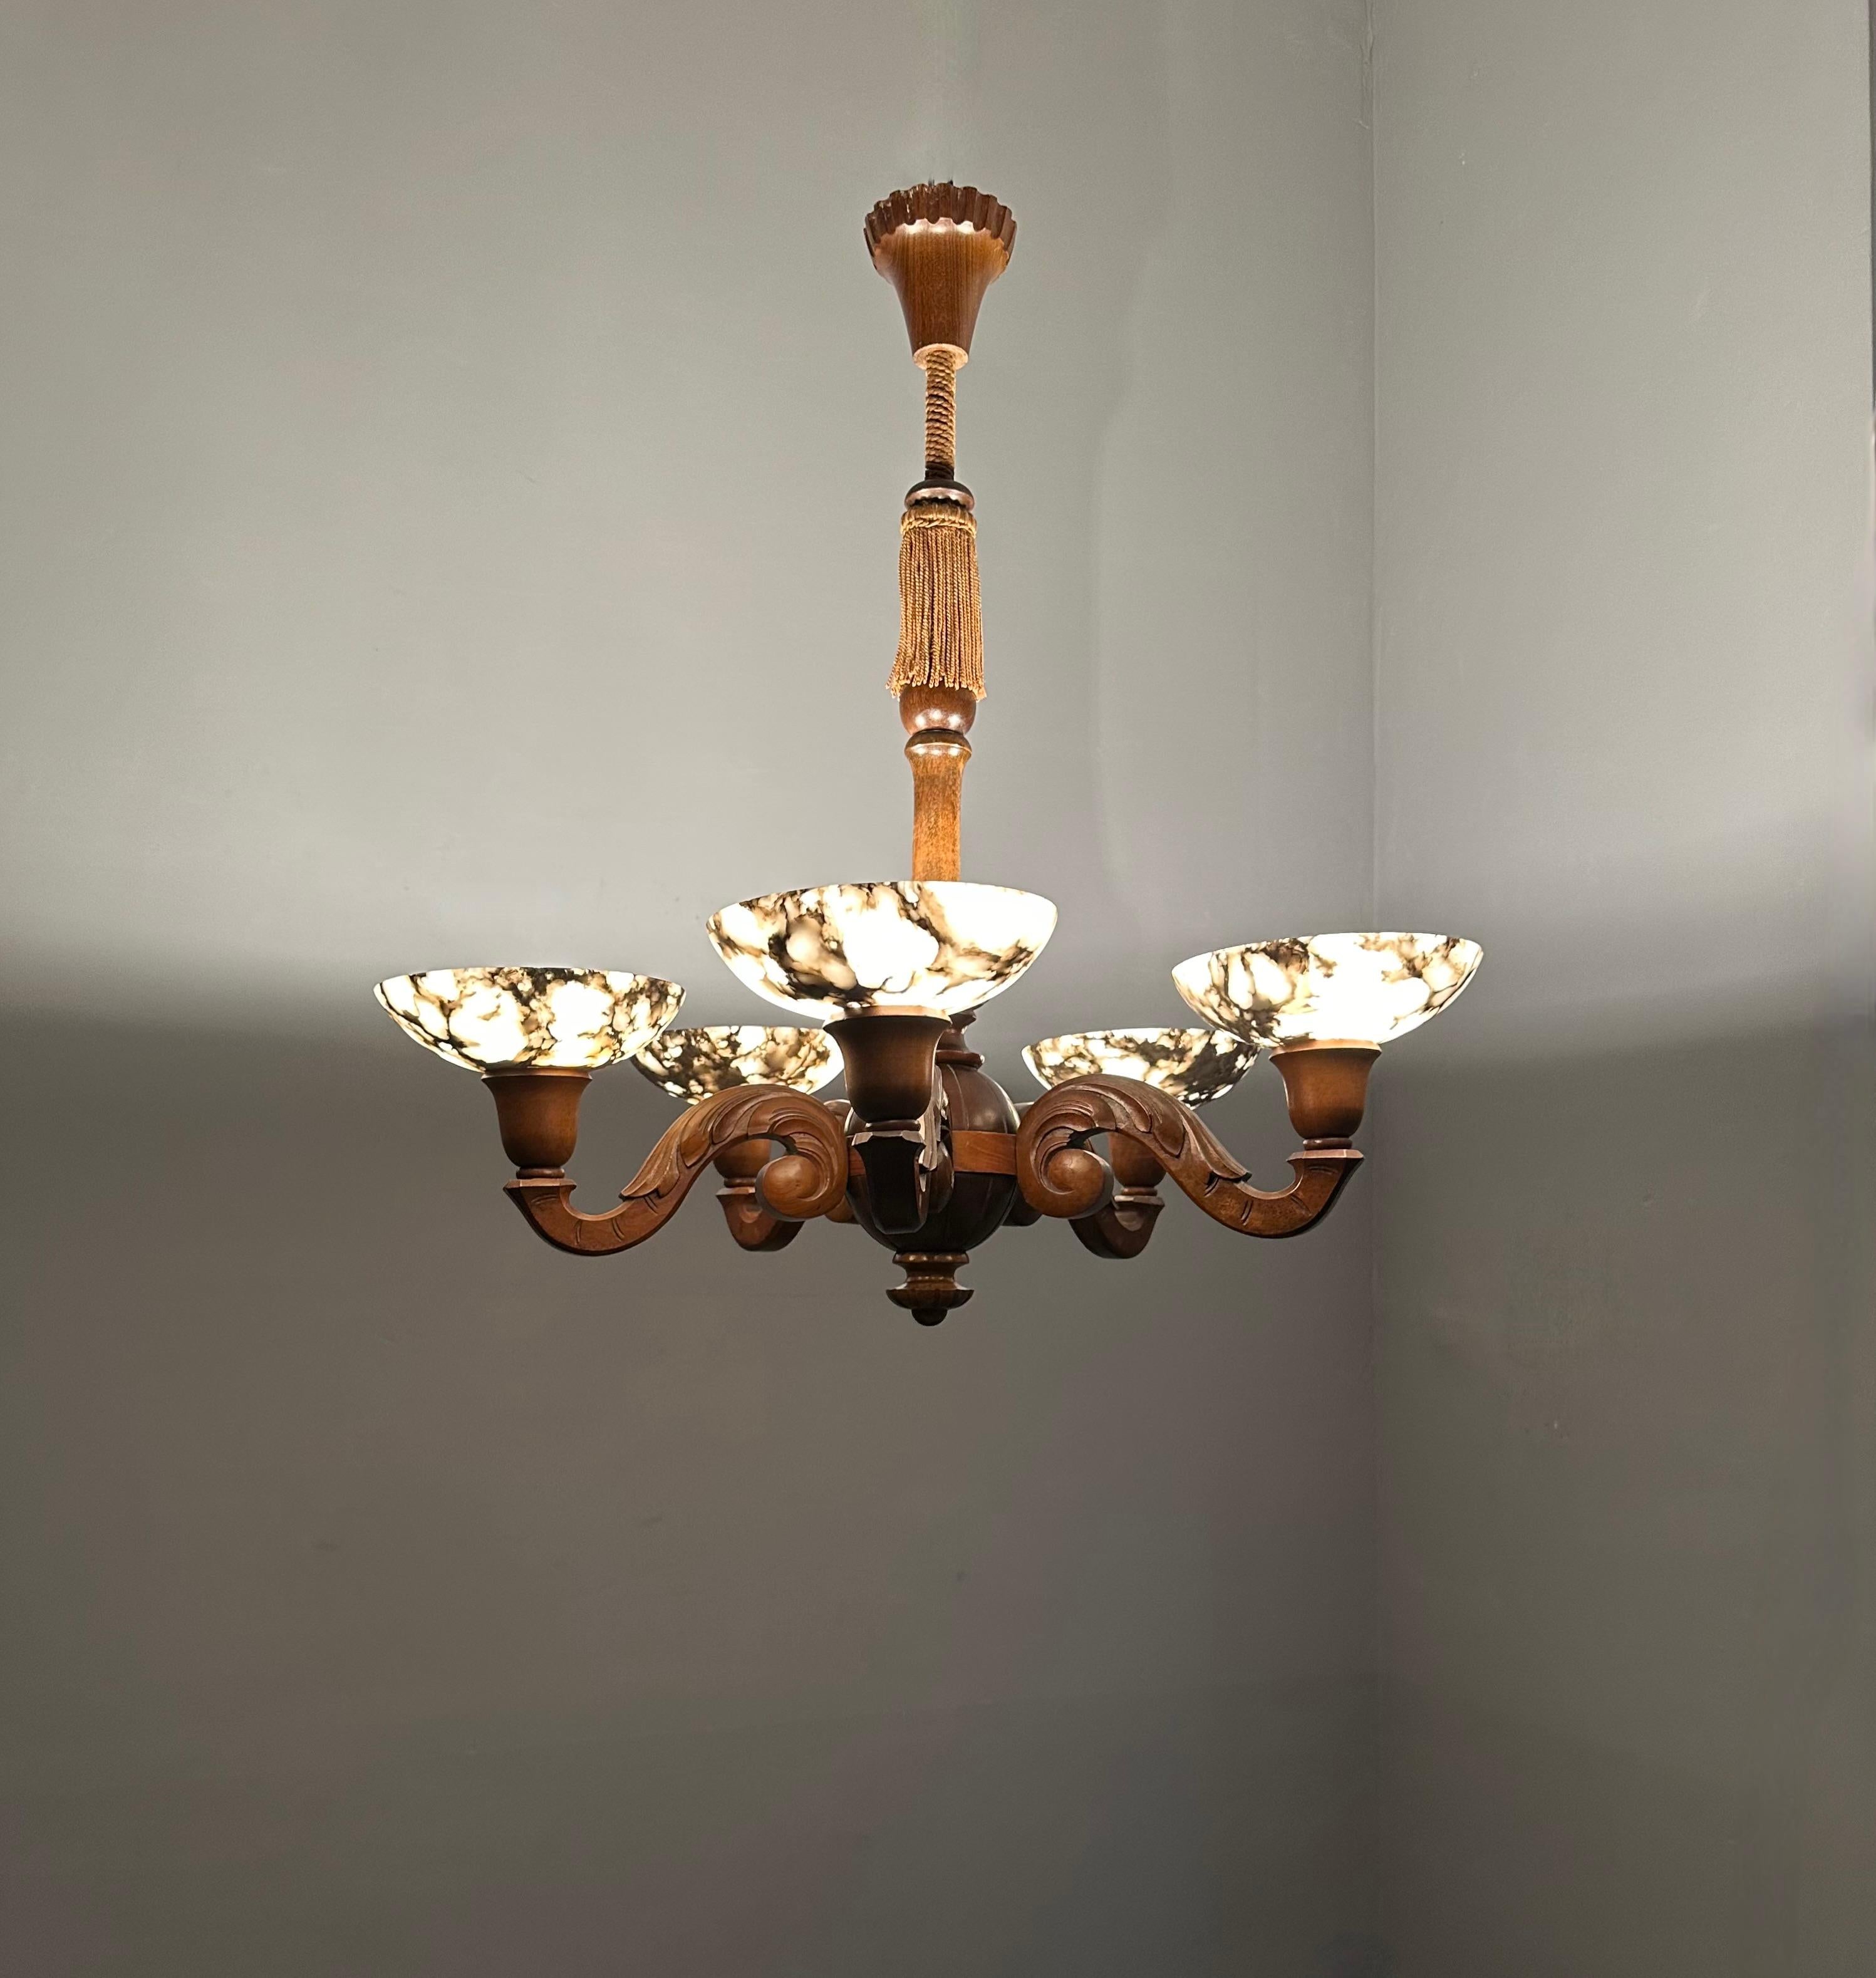 Good size and striking design, early 20th century pendant.

This antique, five-light chandelier from the Arts & Crafts era is another one of our recent great finds. The wooden body and arms are in the best possible condition and they come with a